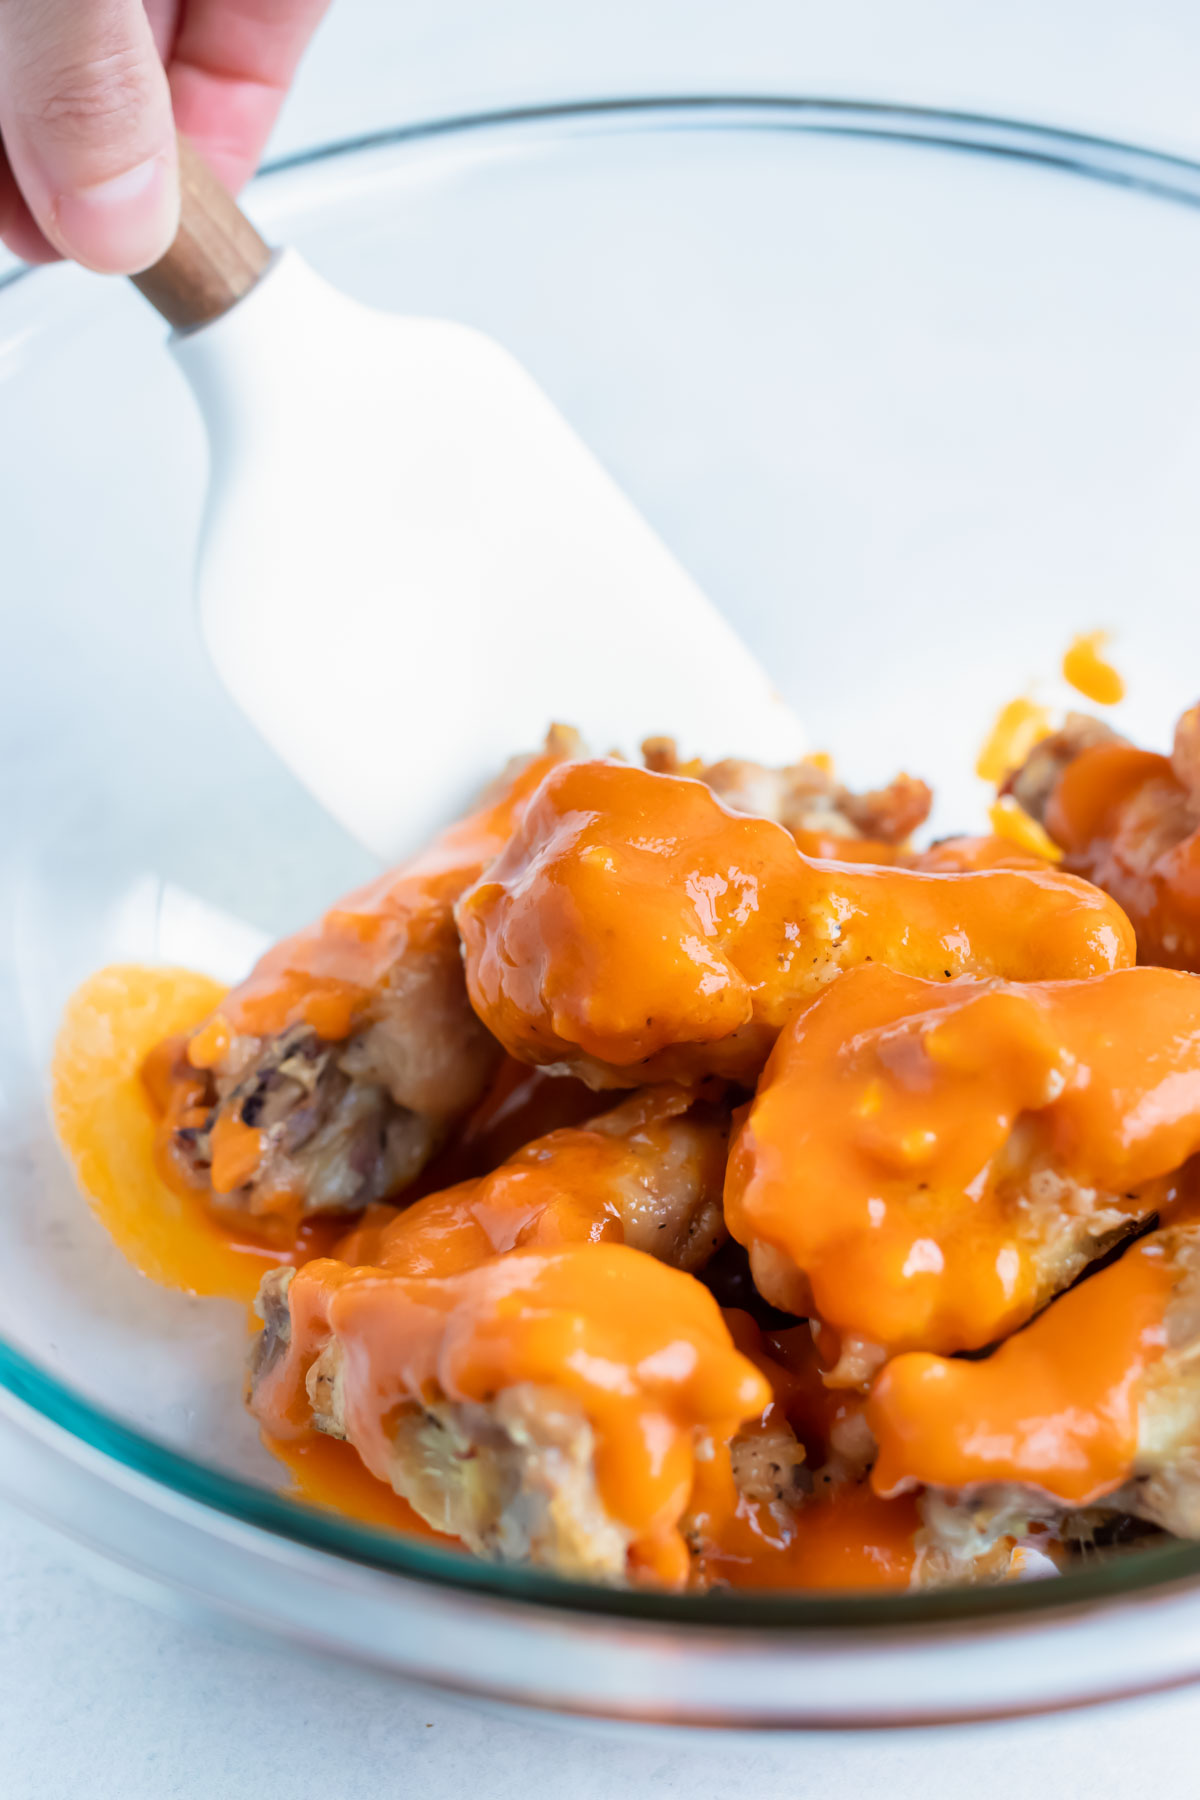 Baked wings are coated with a spicy buffalo sauce before baking.